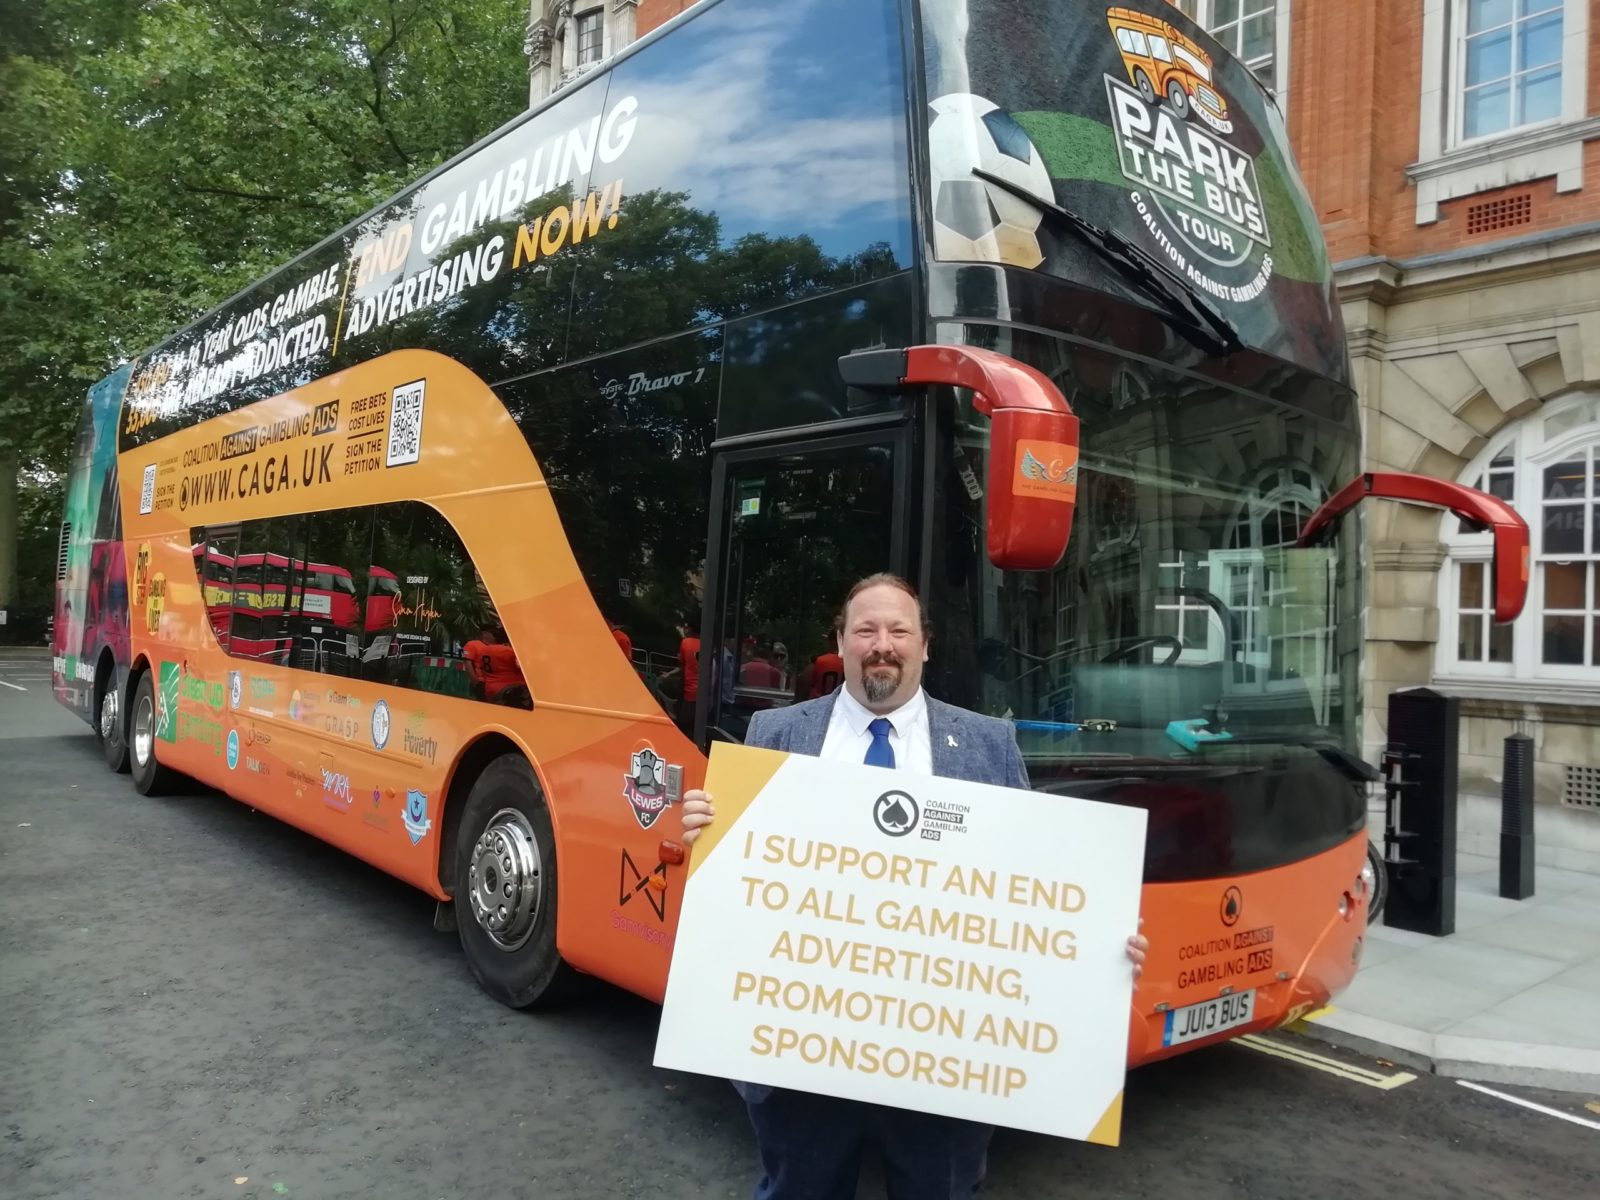 Cllr Vince Maple in London supporting the campaign against gambling advertising